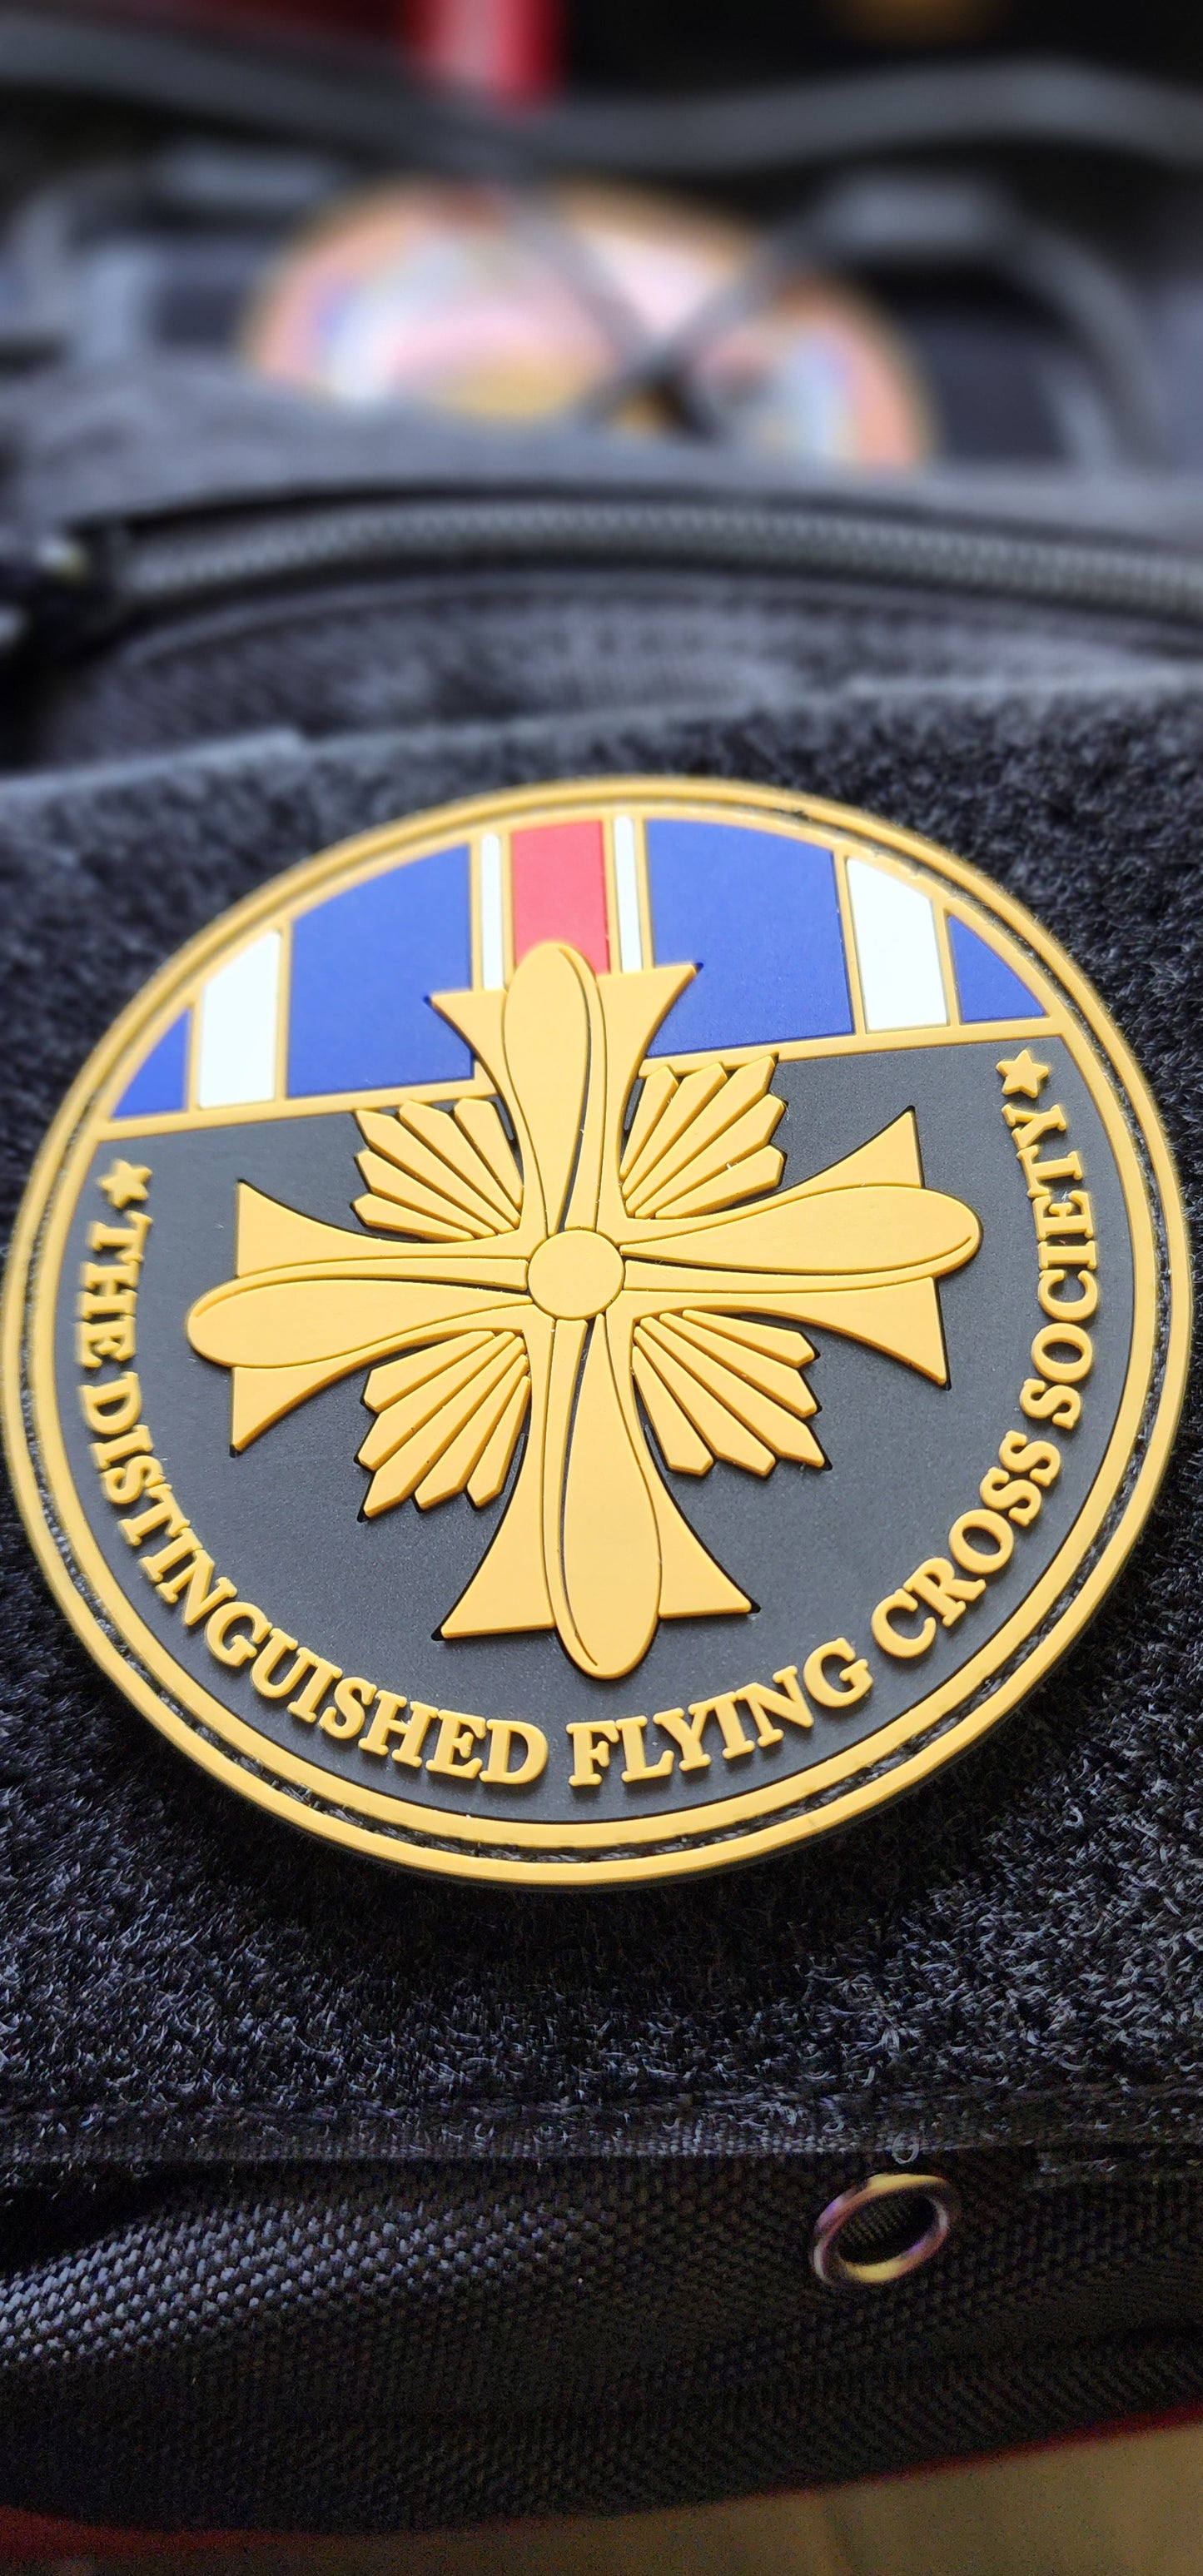 3" DFC Society Challenge Coin Morale Patch (Front and Back)